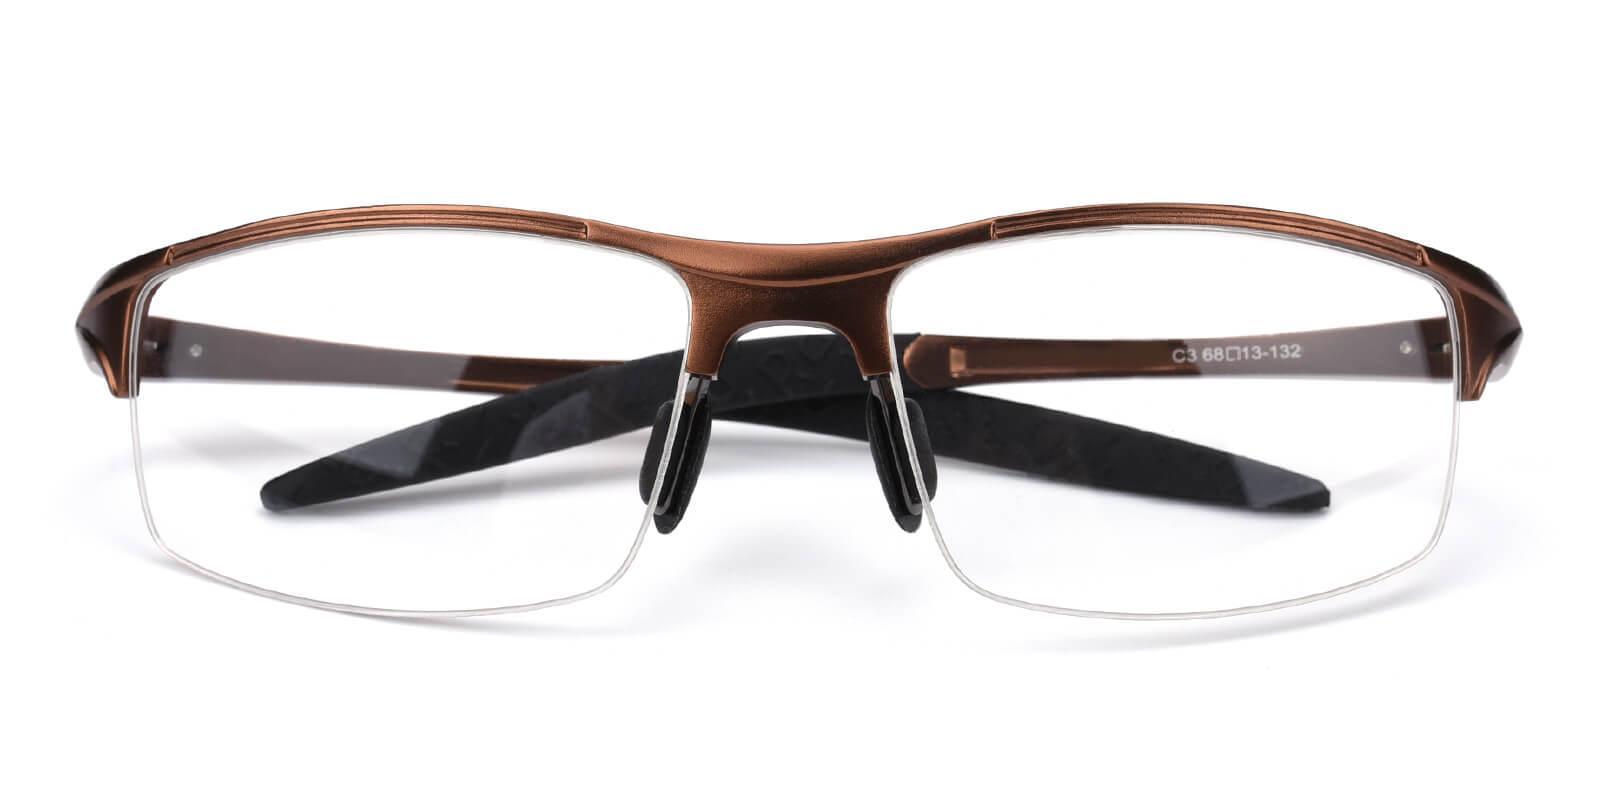 Apollo Brown Metal NosePads , SportsGlasses Frames from ABBE Glasses